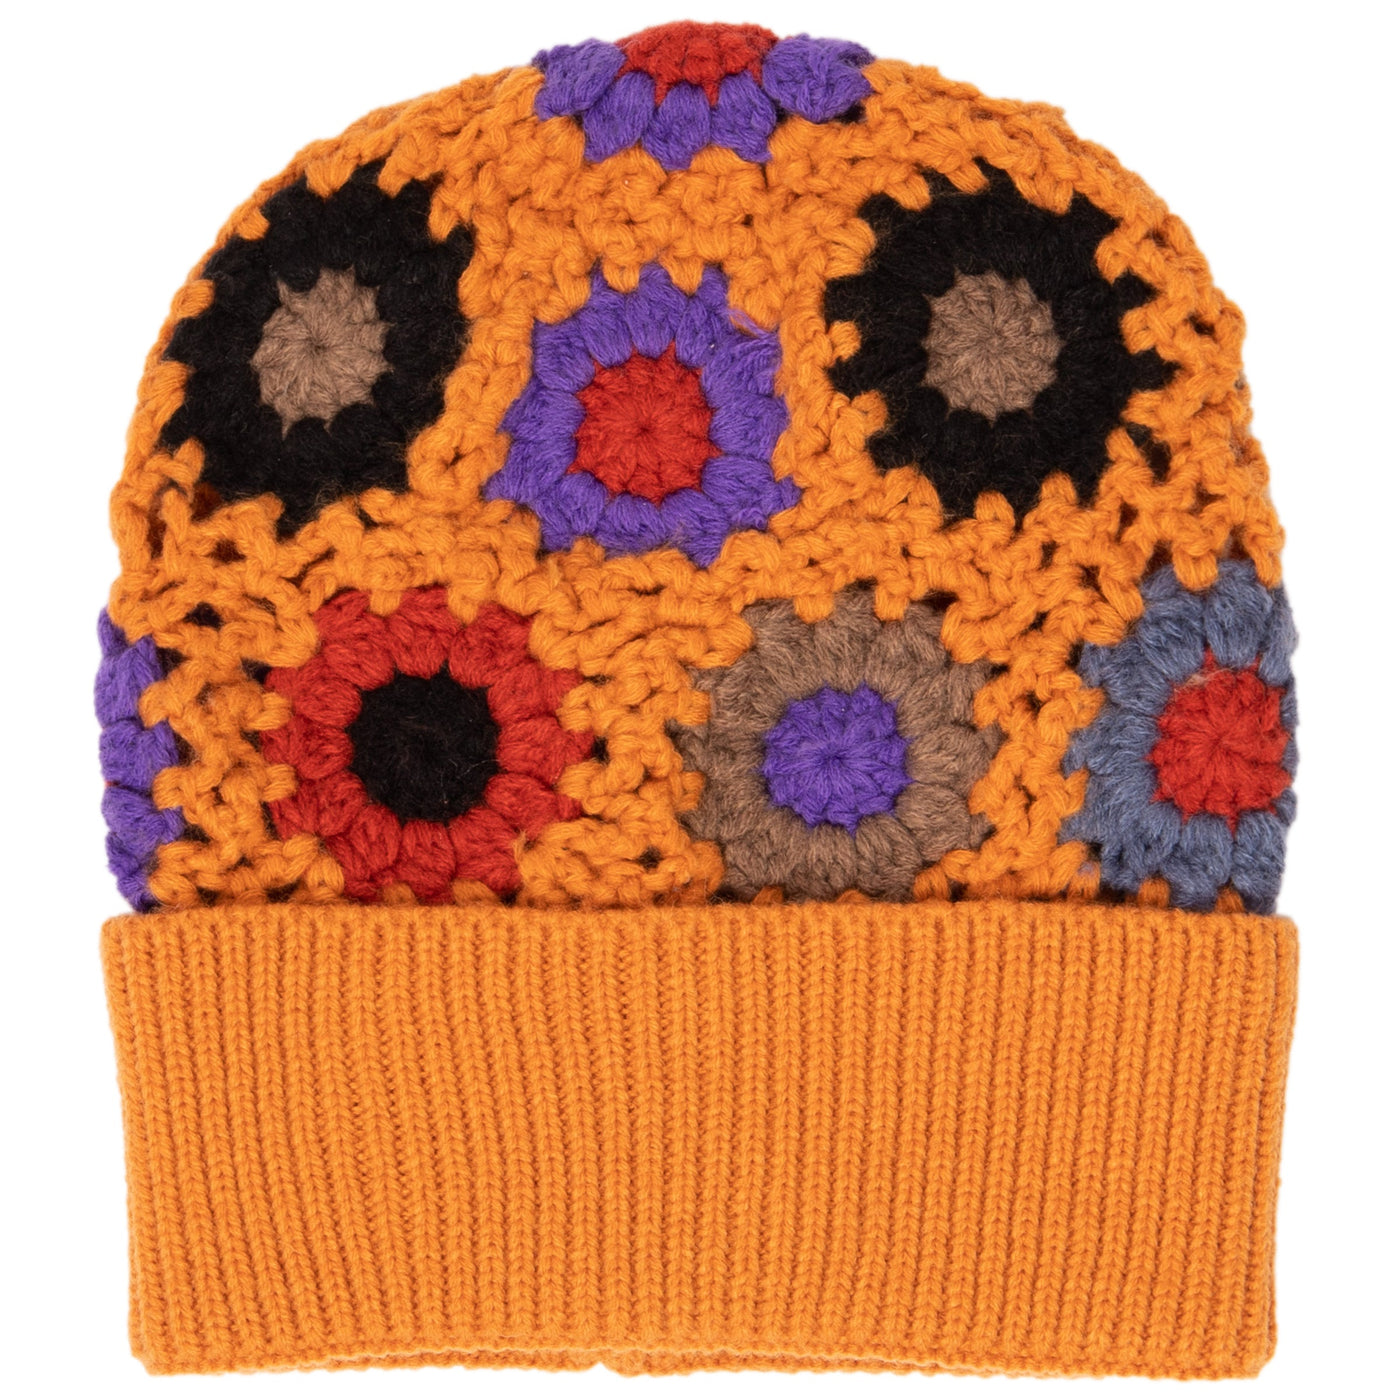 BEANIE - Maybelle - Granny Square Knit Cuff Beanie